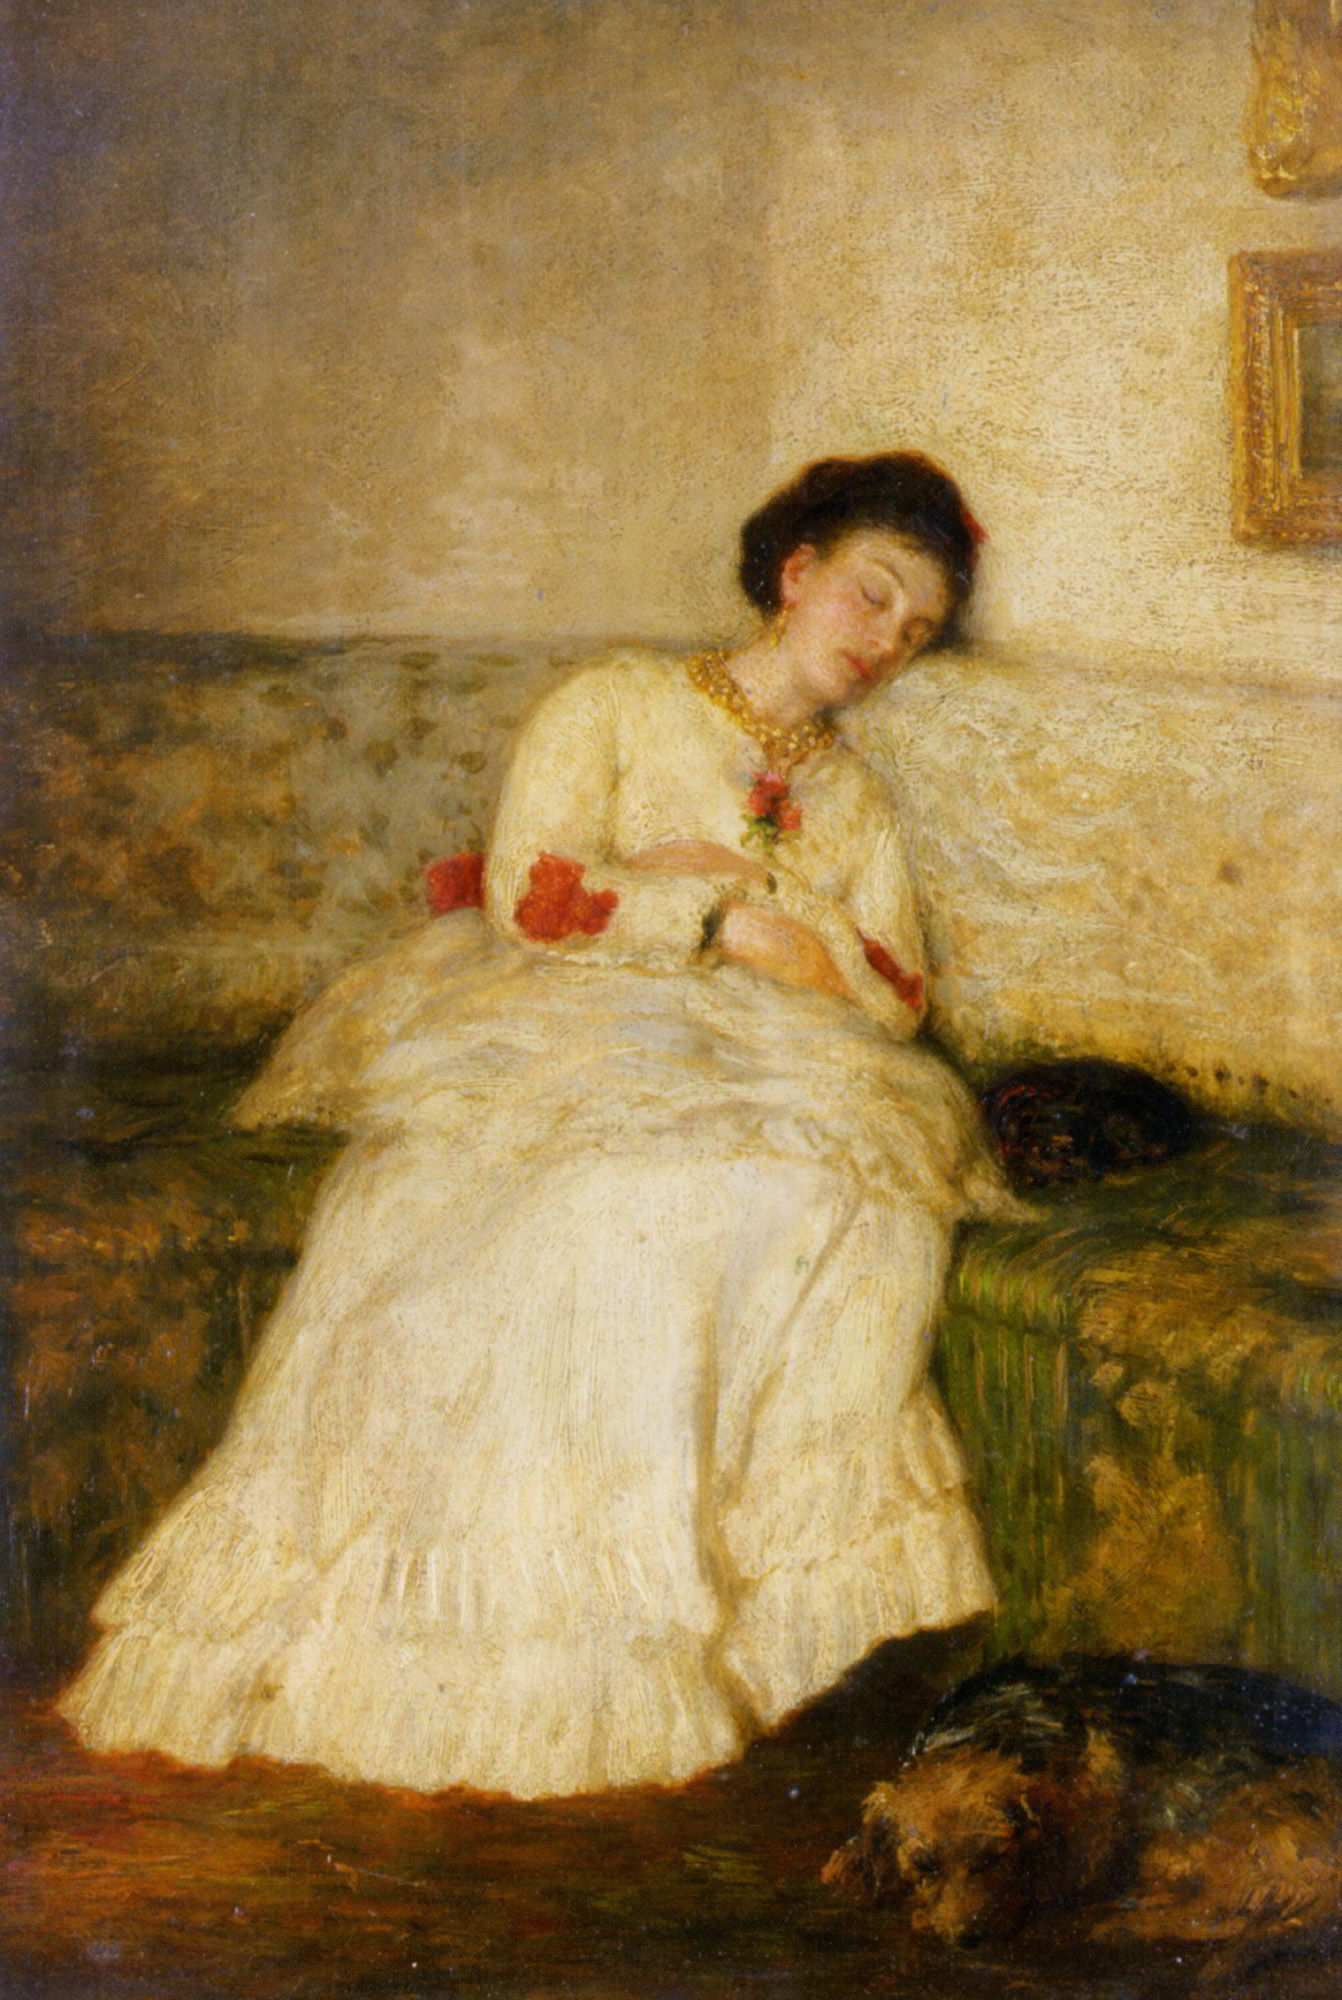 Asleep by Sir William Quiller Orchardson